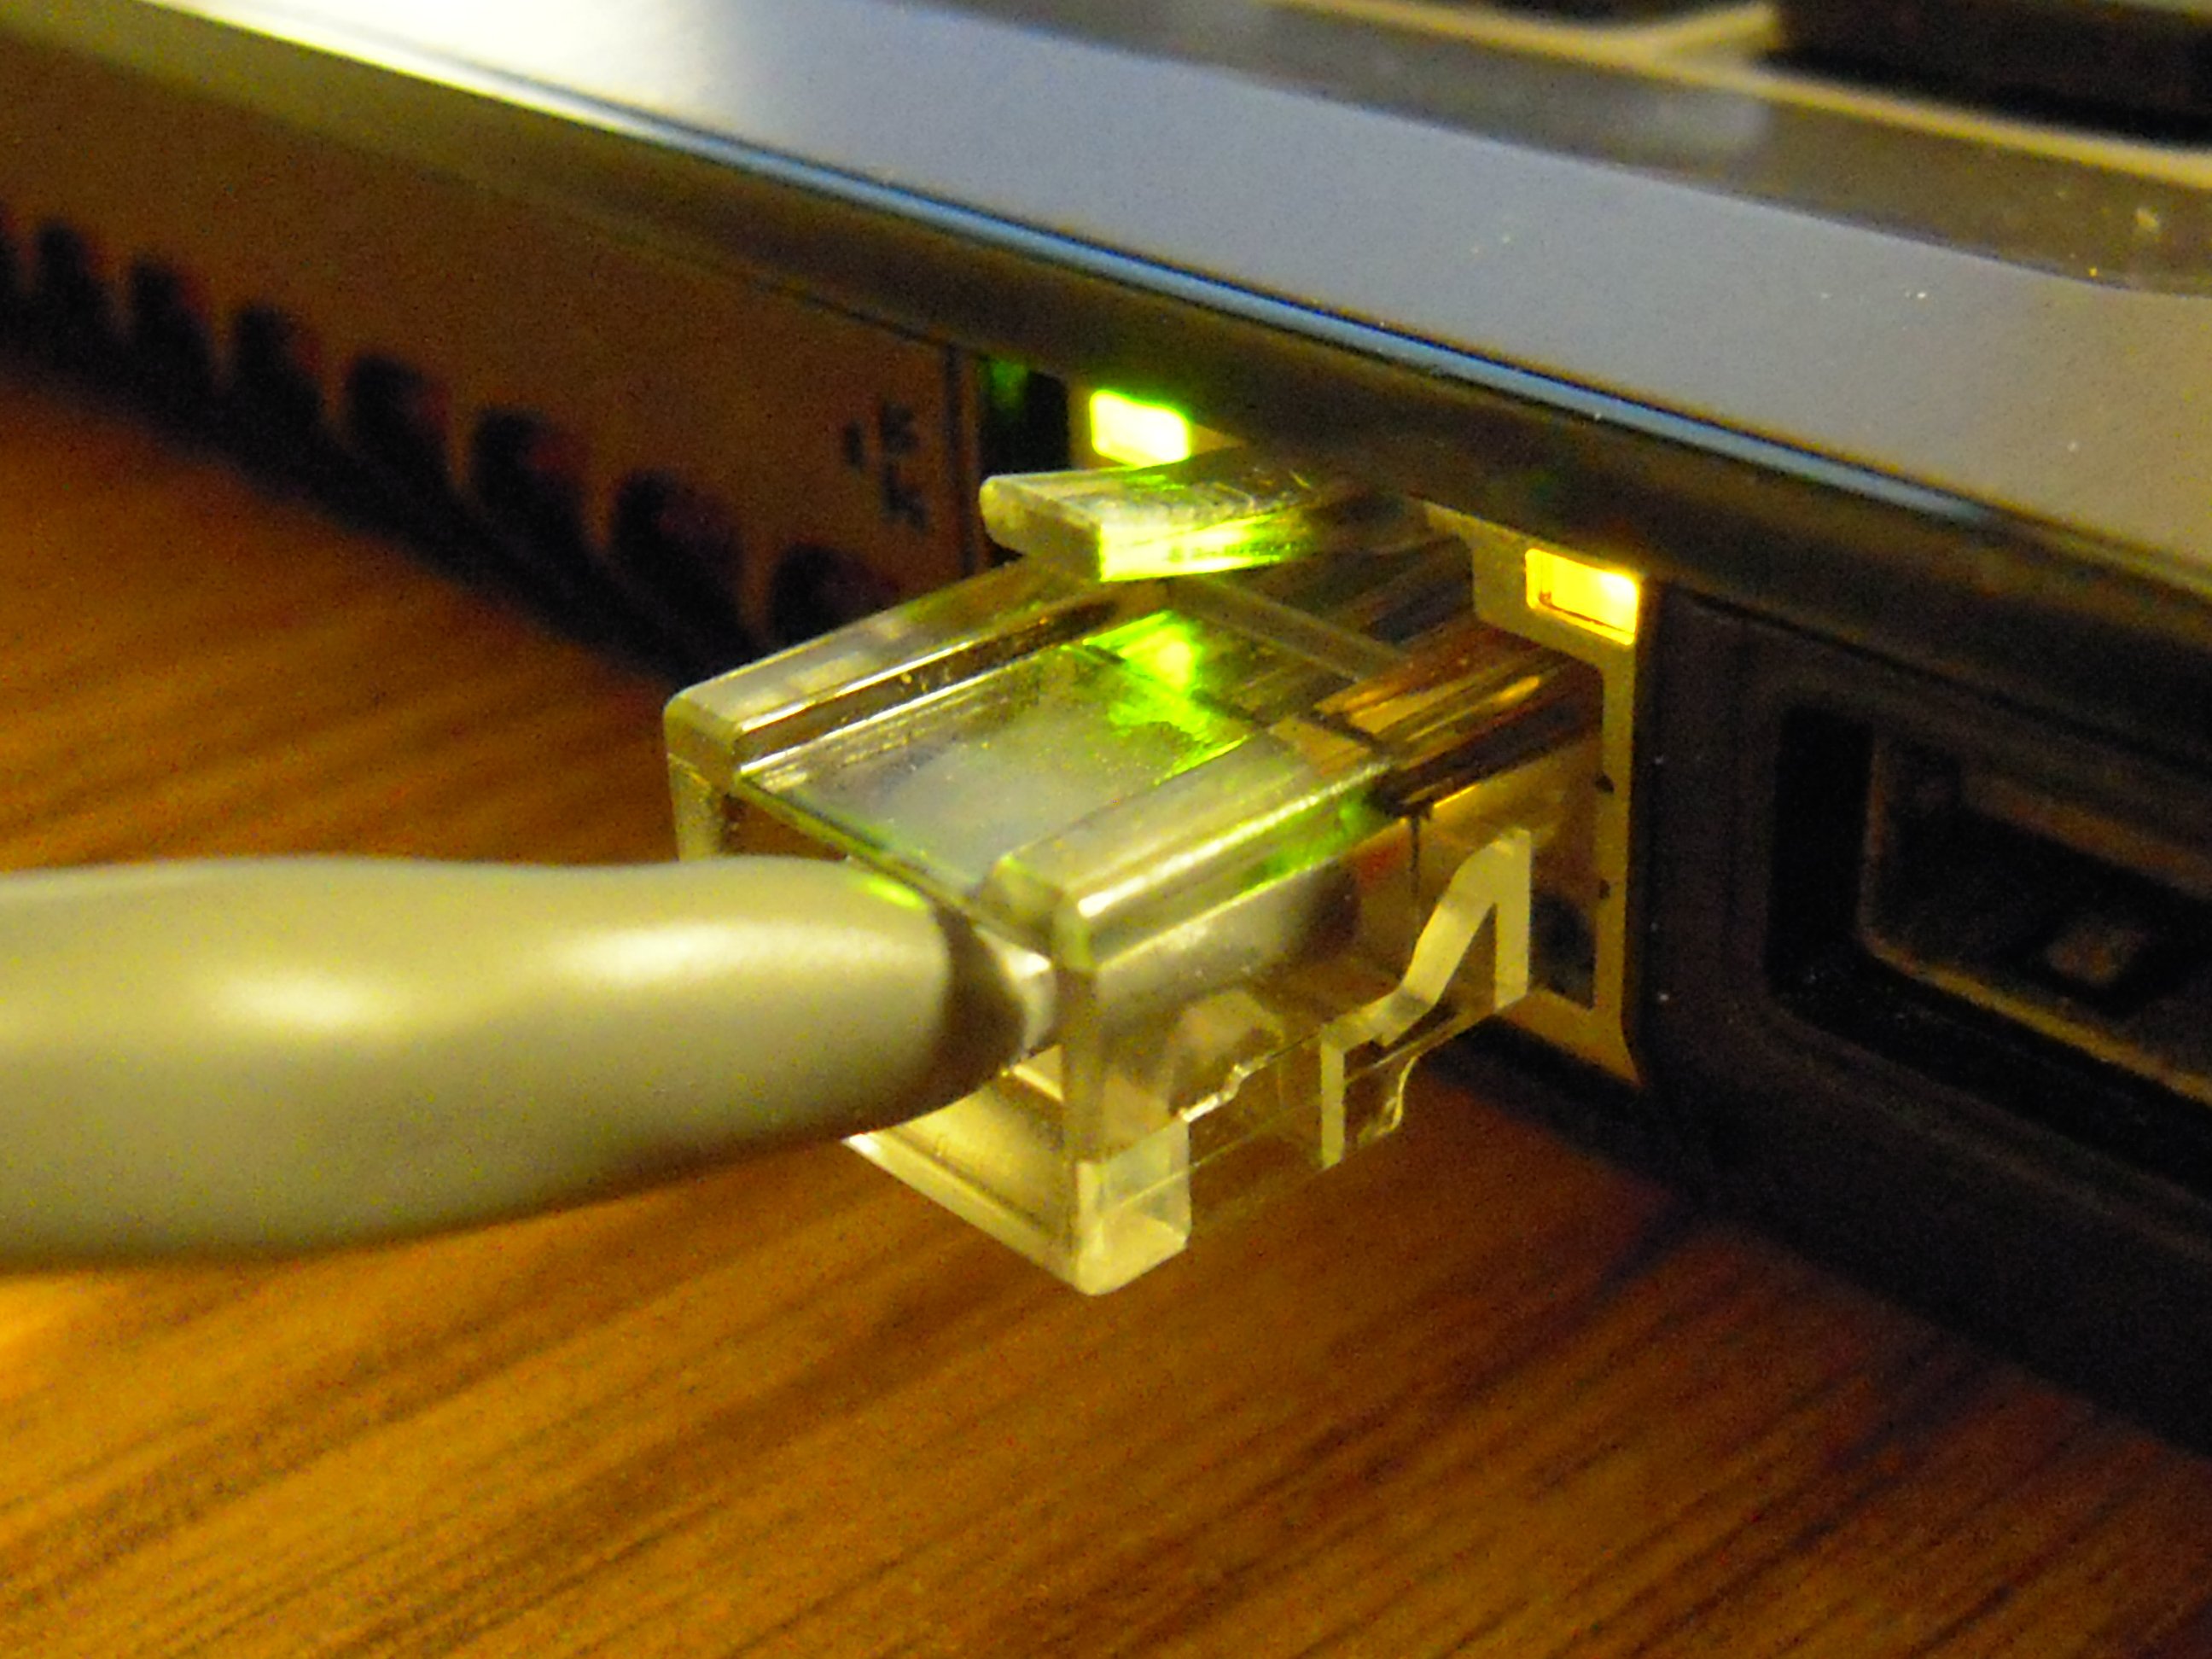 Ethernet cable plugged into a computer